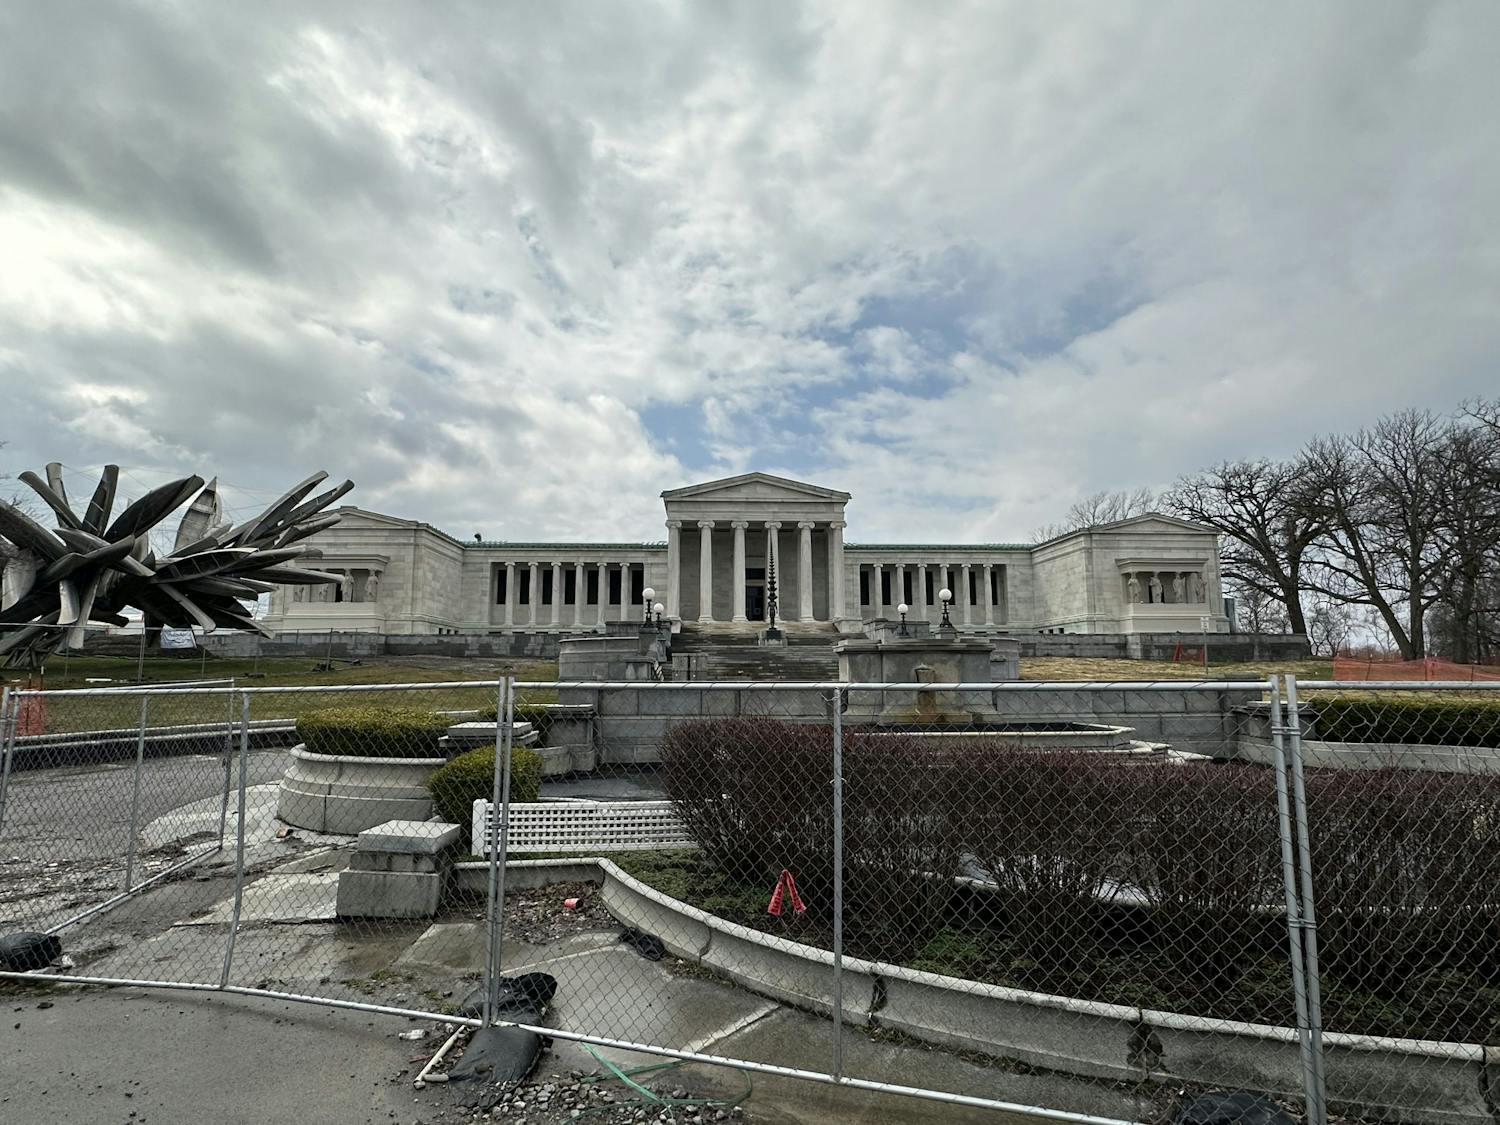 The Albright-Knox Museum has been under construction for three years.